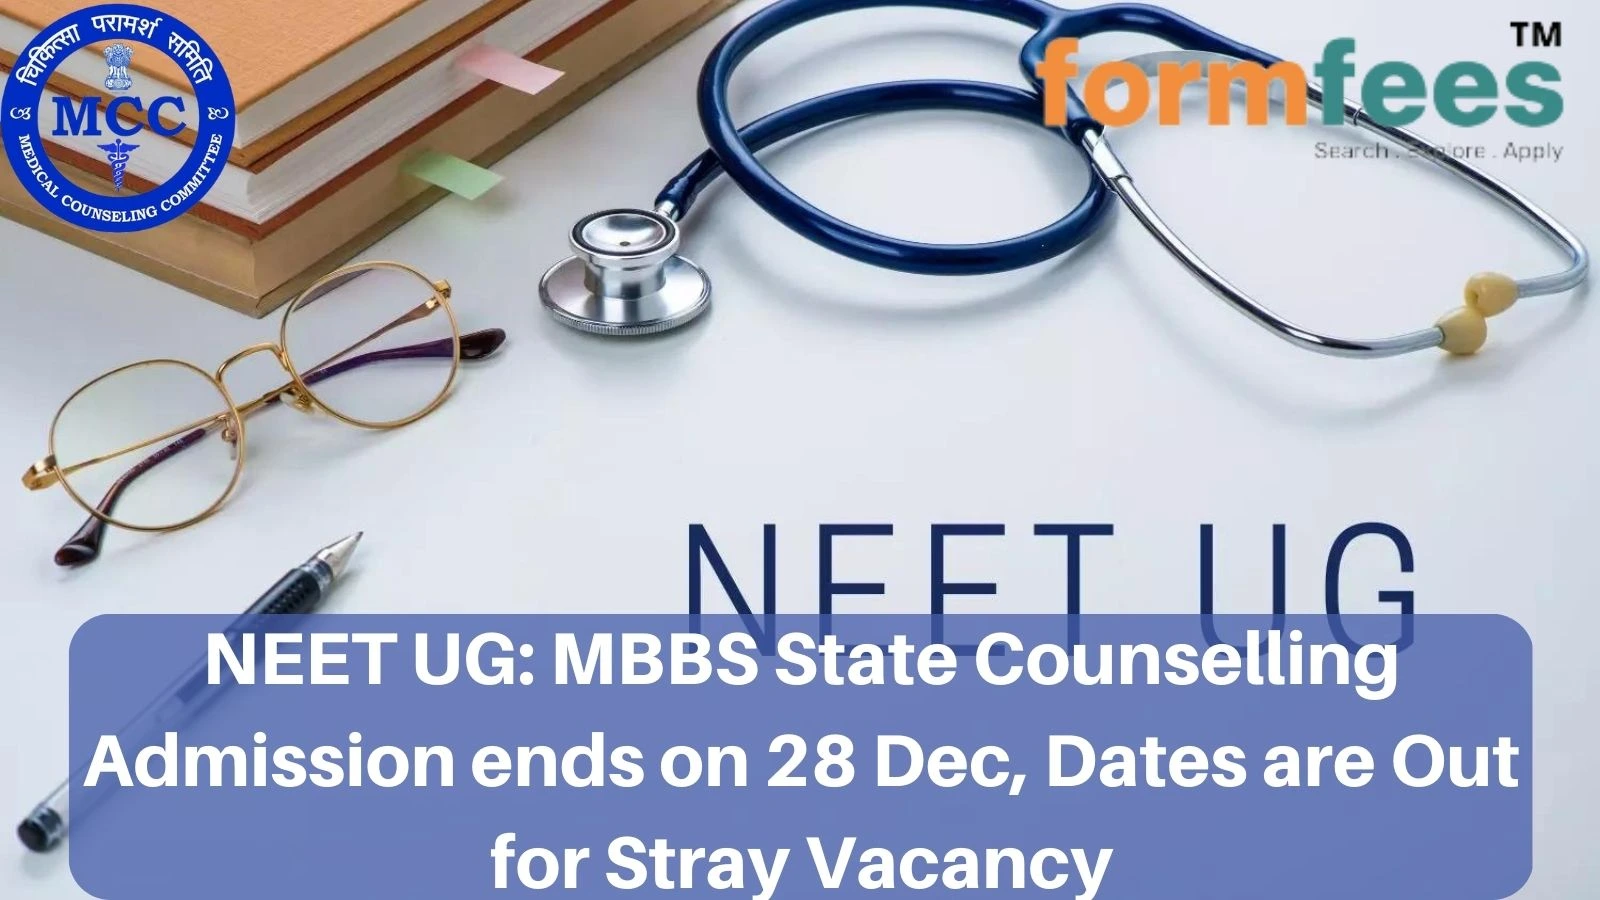 NEET UG: MBBS State Counselling Admission ends on 28 Dec, Dates are Out for Stray Vacancy